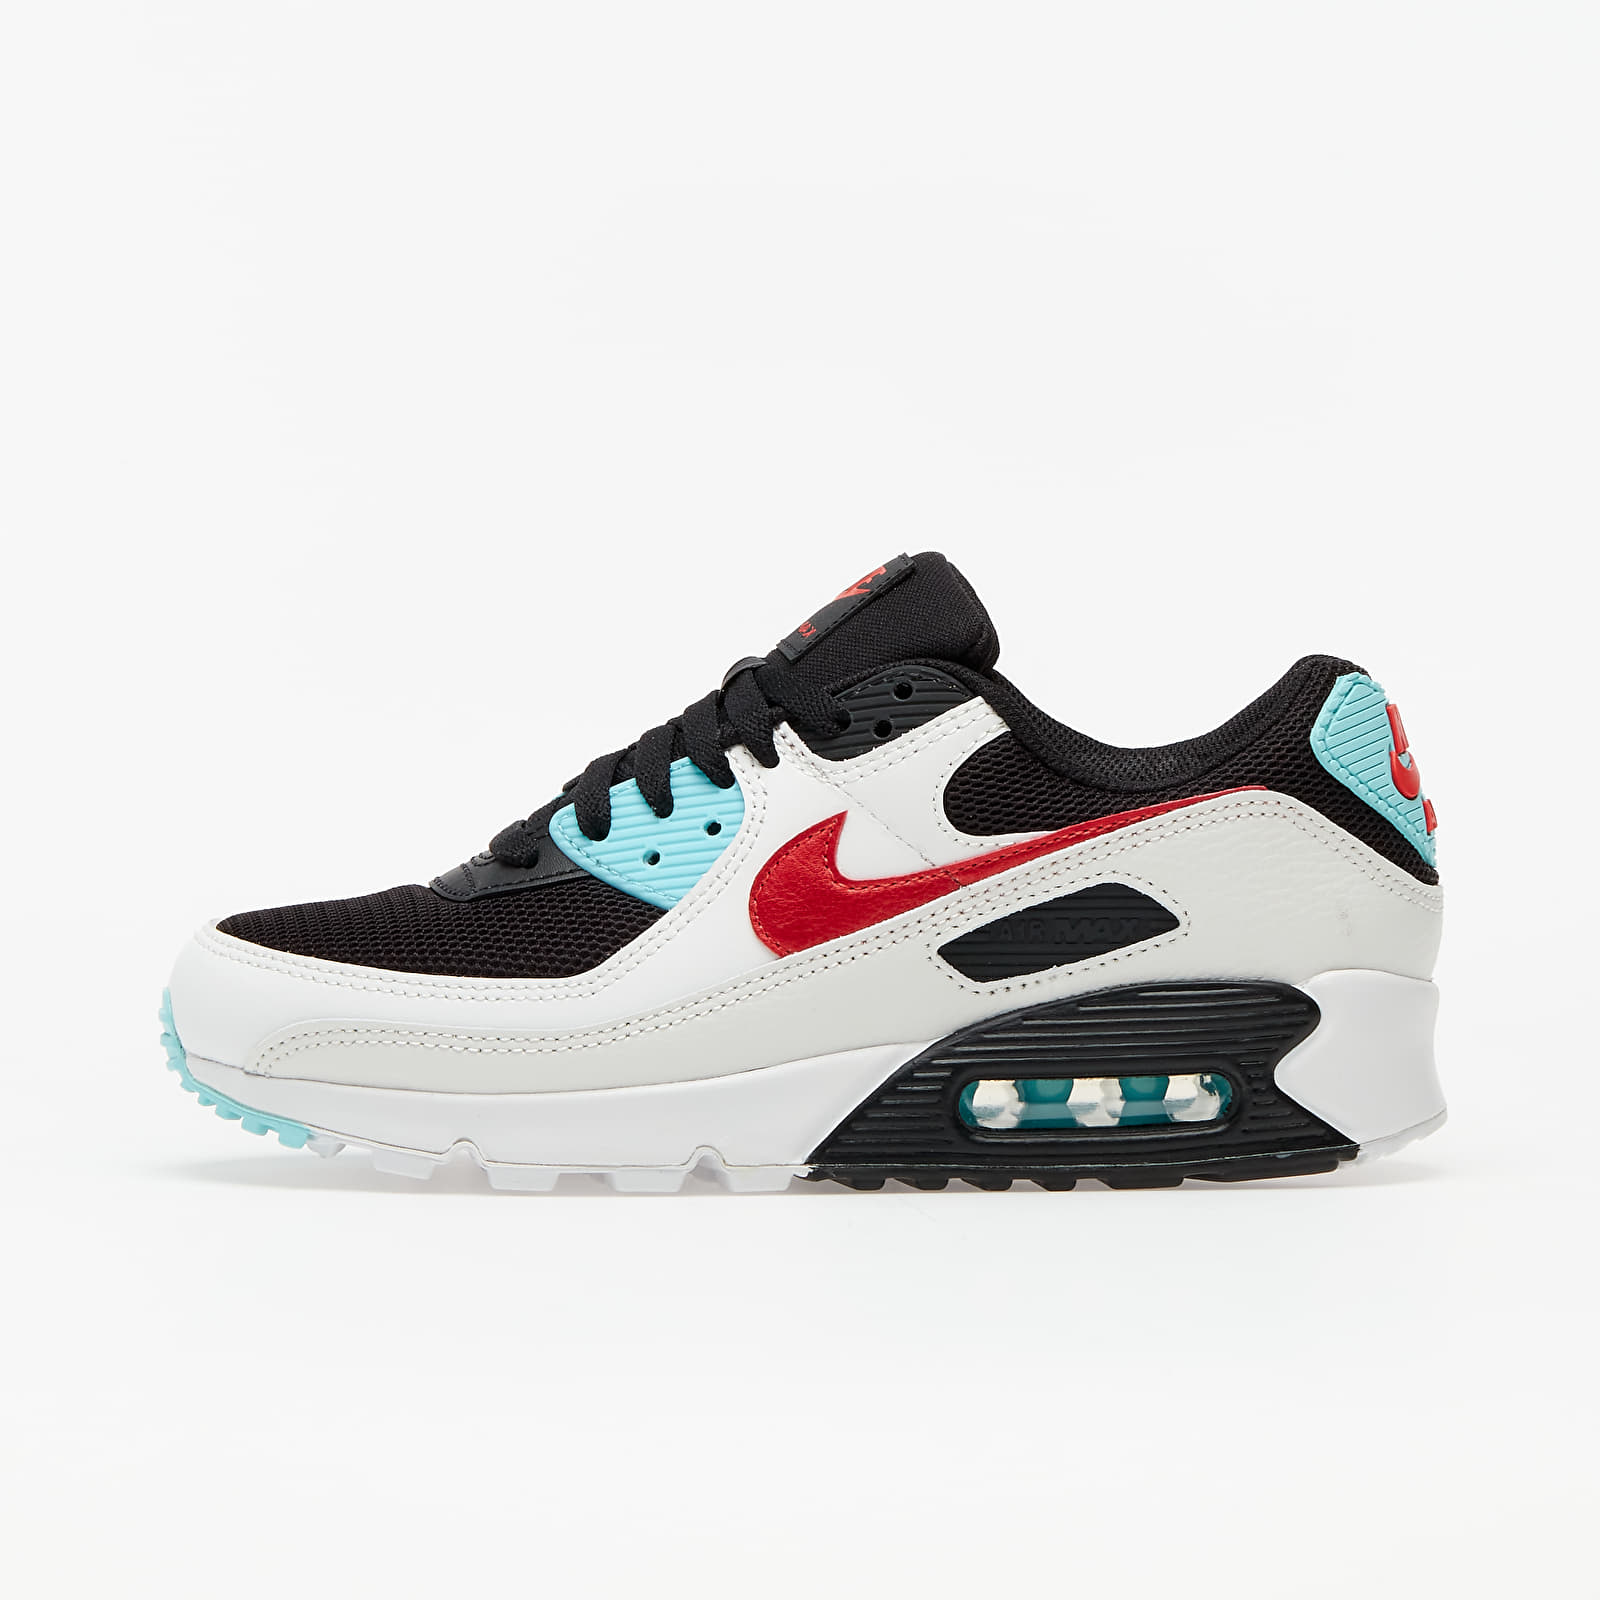 Dámske topánky a tenisky Nike Wmns Air Max 90 Summit White/ Chile Red-Bleached Aqua